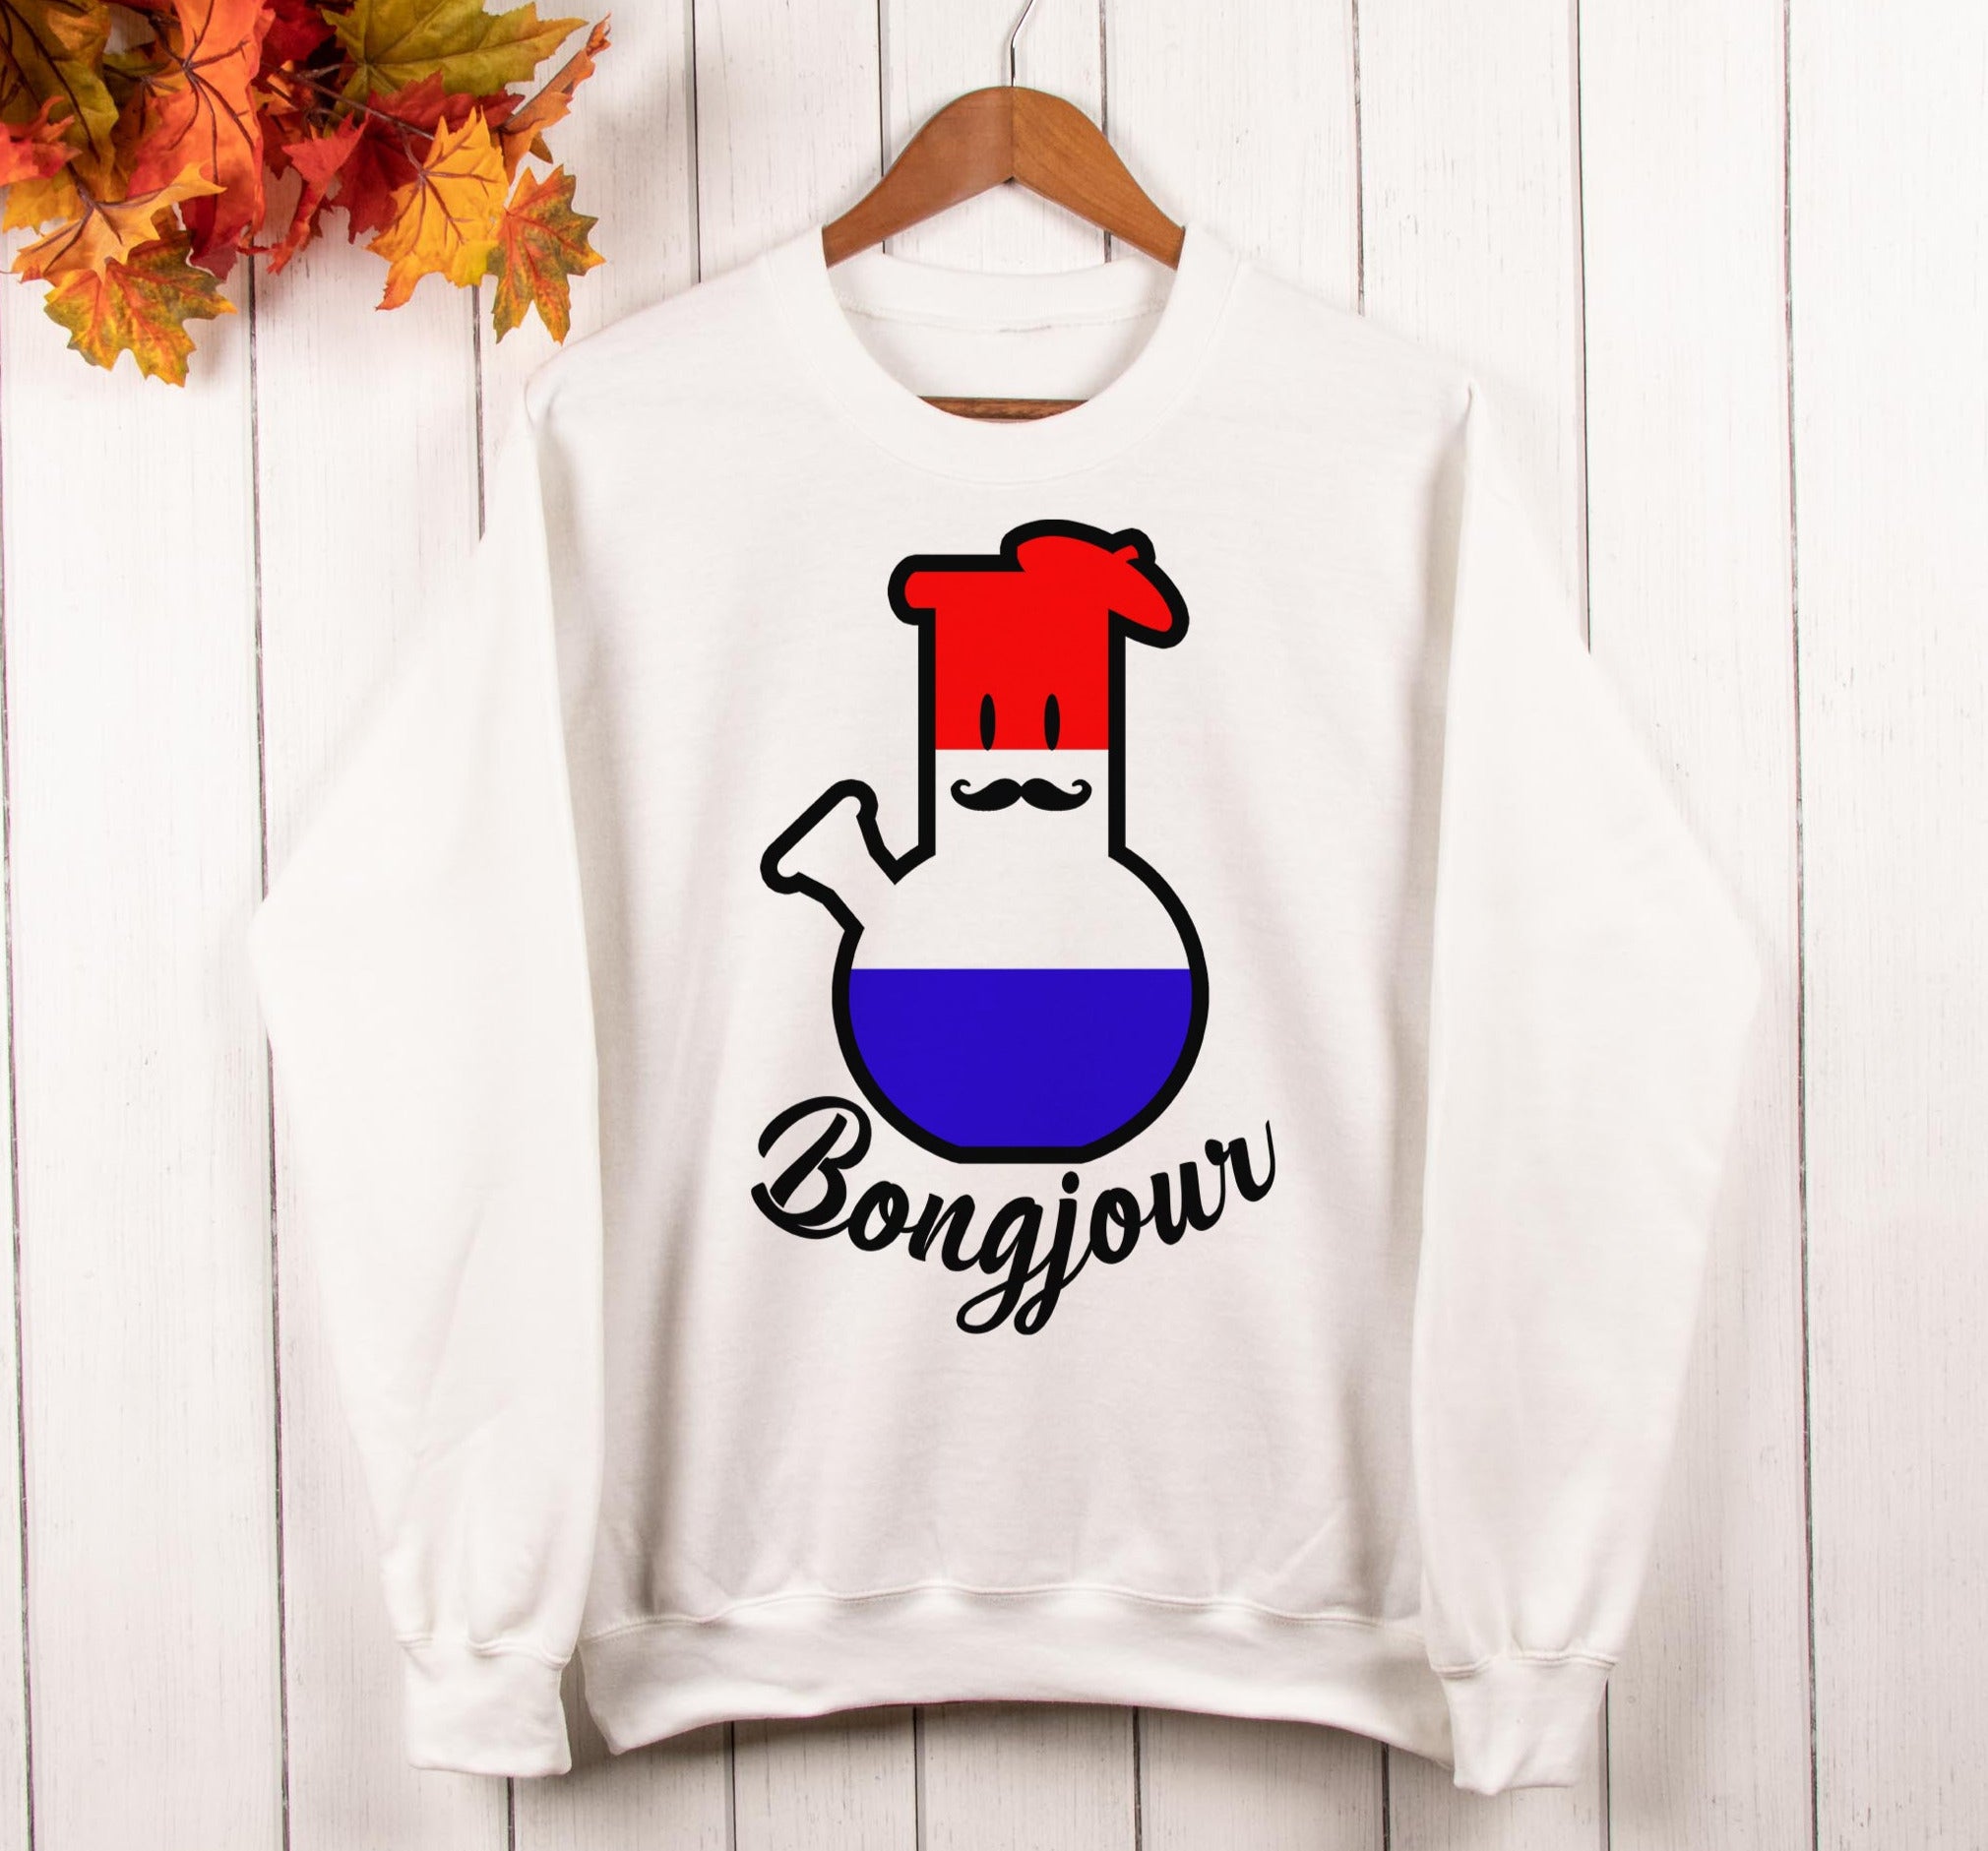 weed sweater that says bongjour - HighCiti